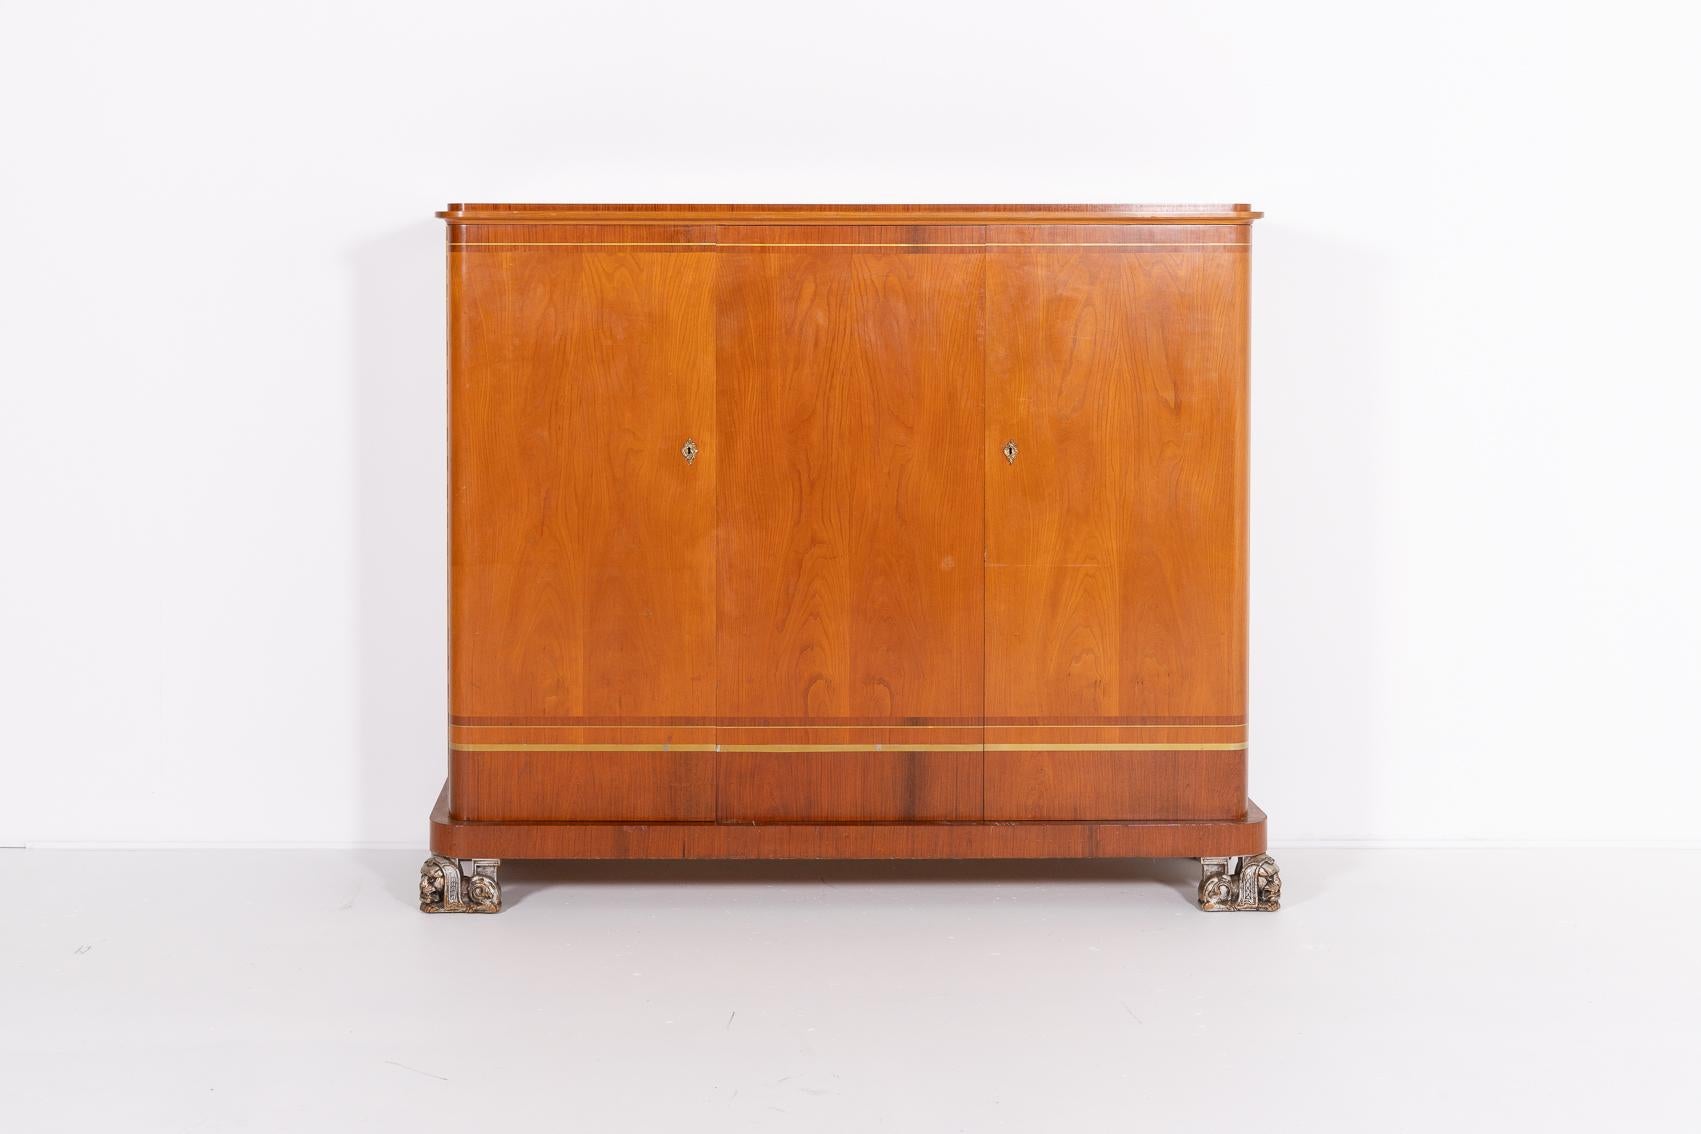 Art deco cabinet by Erik Chambert, Sweden 1920’s. Executed in veneer finish with spectacular lion sphinx front feet. The dresser has 3 doors where behind them you will find five pull-out drawers and shelves.

Condition
Good, age related marks,